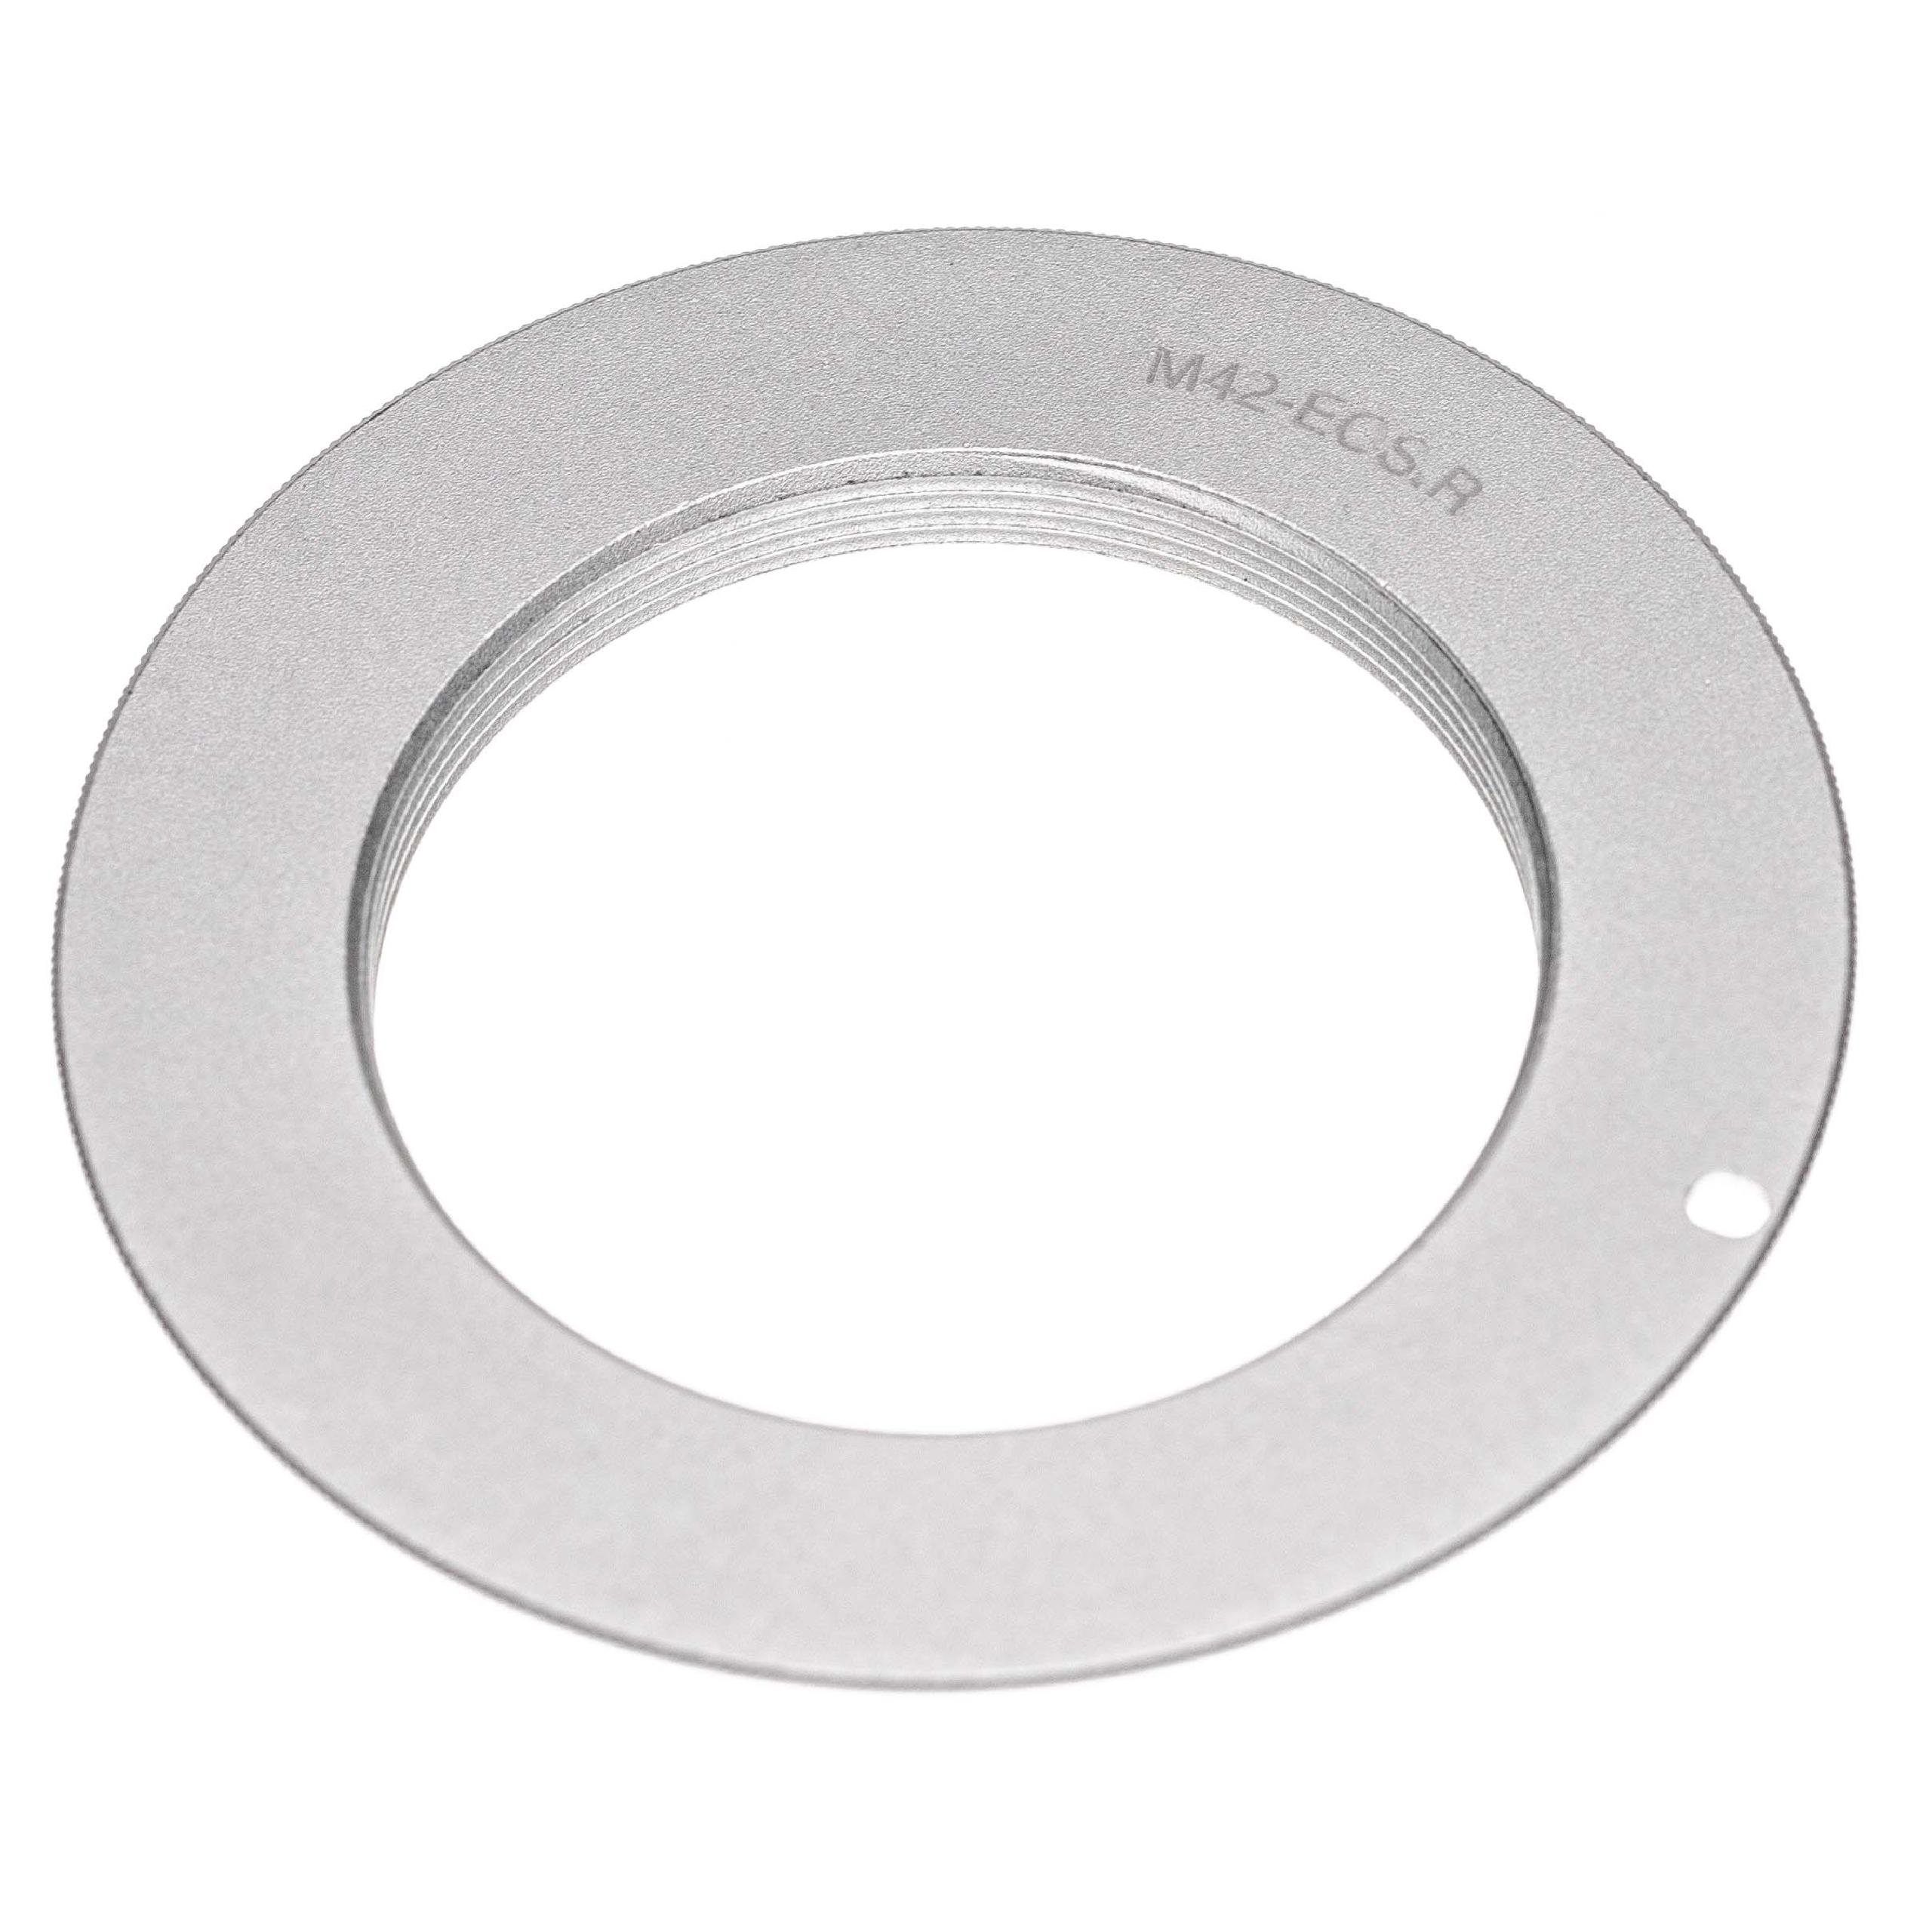 vhbw Adapter Ring compatible with - RF-Bayonet to Lenses with M42 Thread Silver